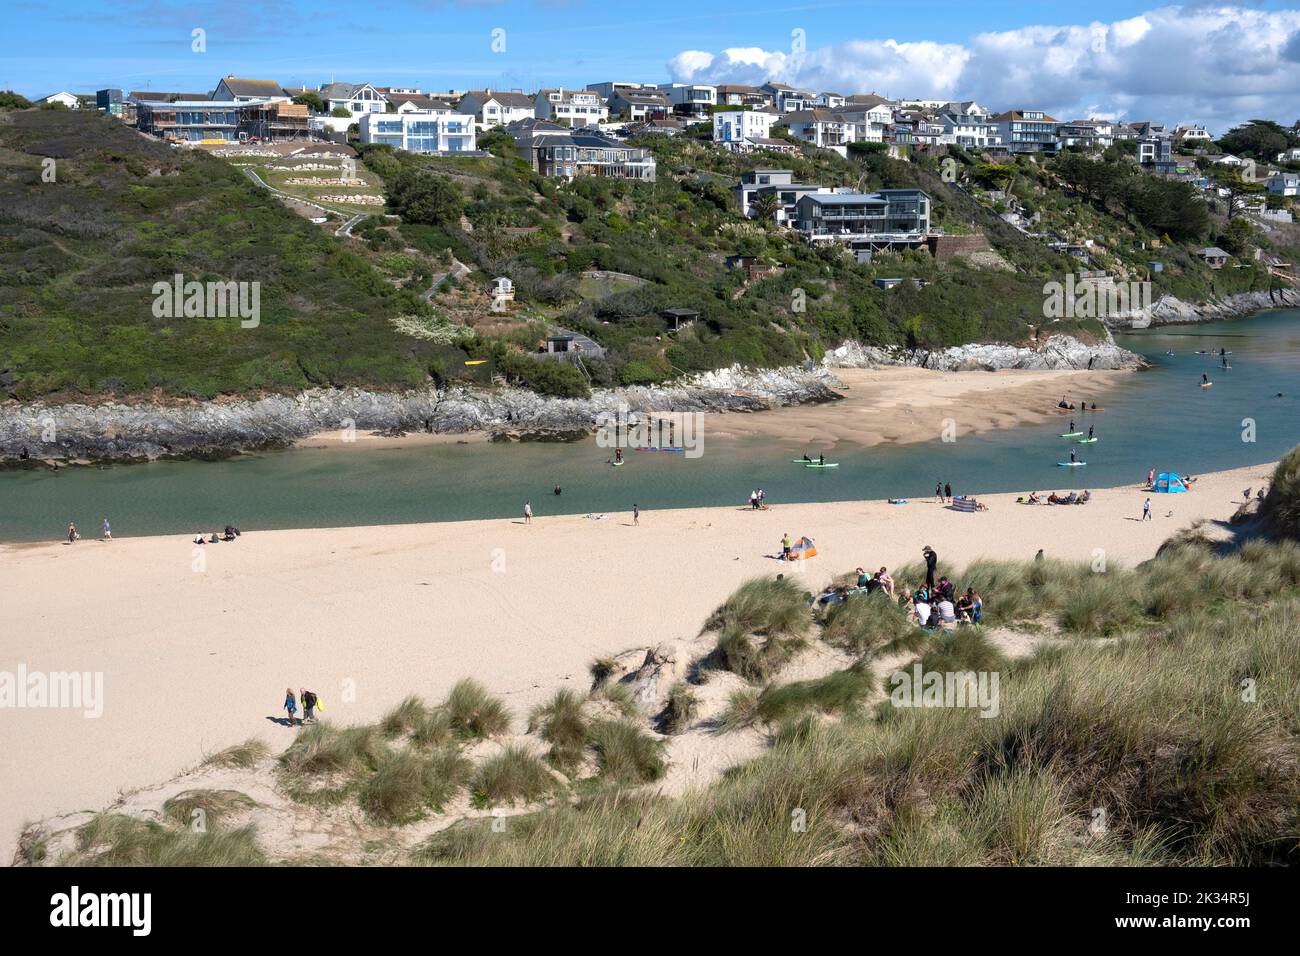 An aerial view of the village of Pentire high on a headland overlooking Crantock beach in North Cornwall, England. Stock Photo